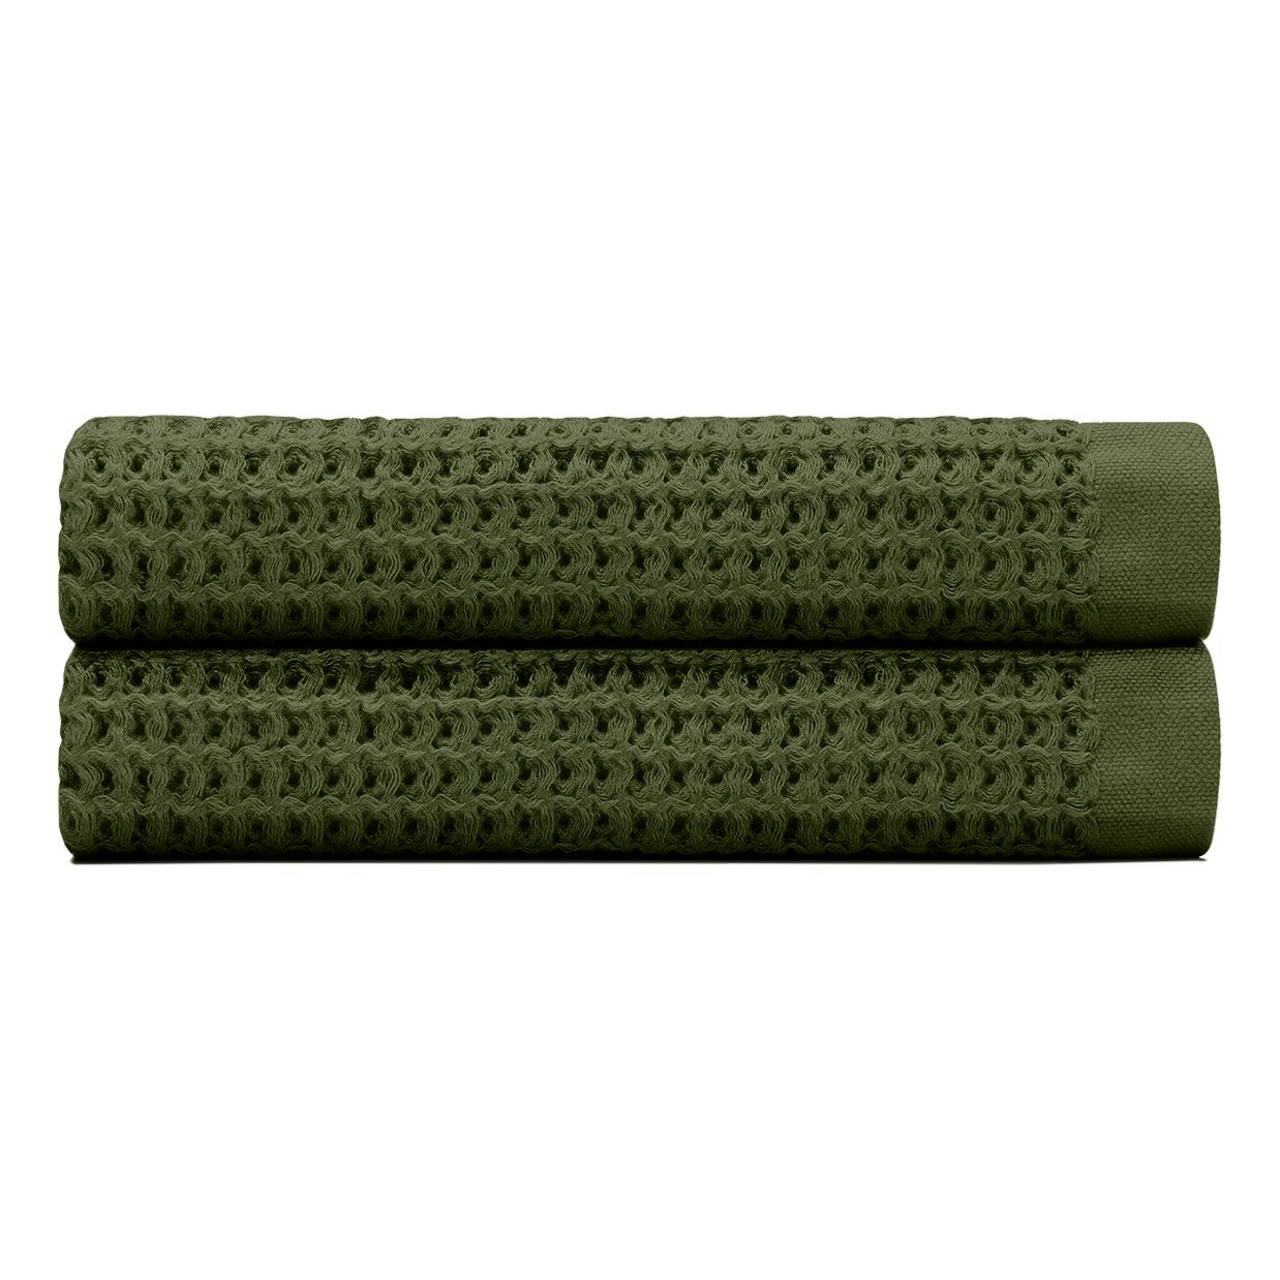 Everyday Luxury Bath Towel Sets - Forest Green – ZigZagZurich